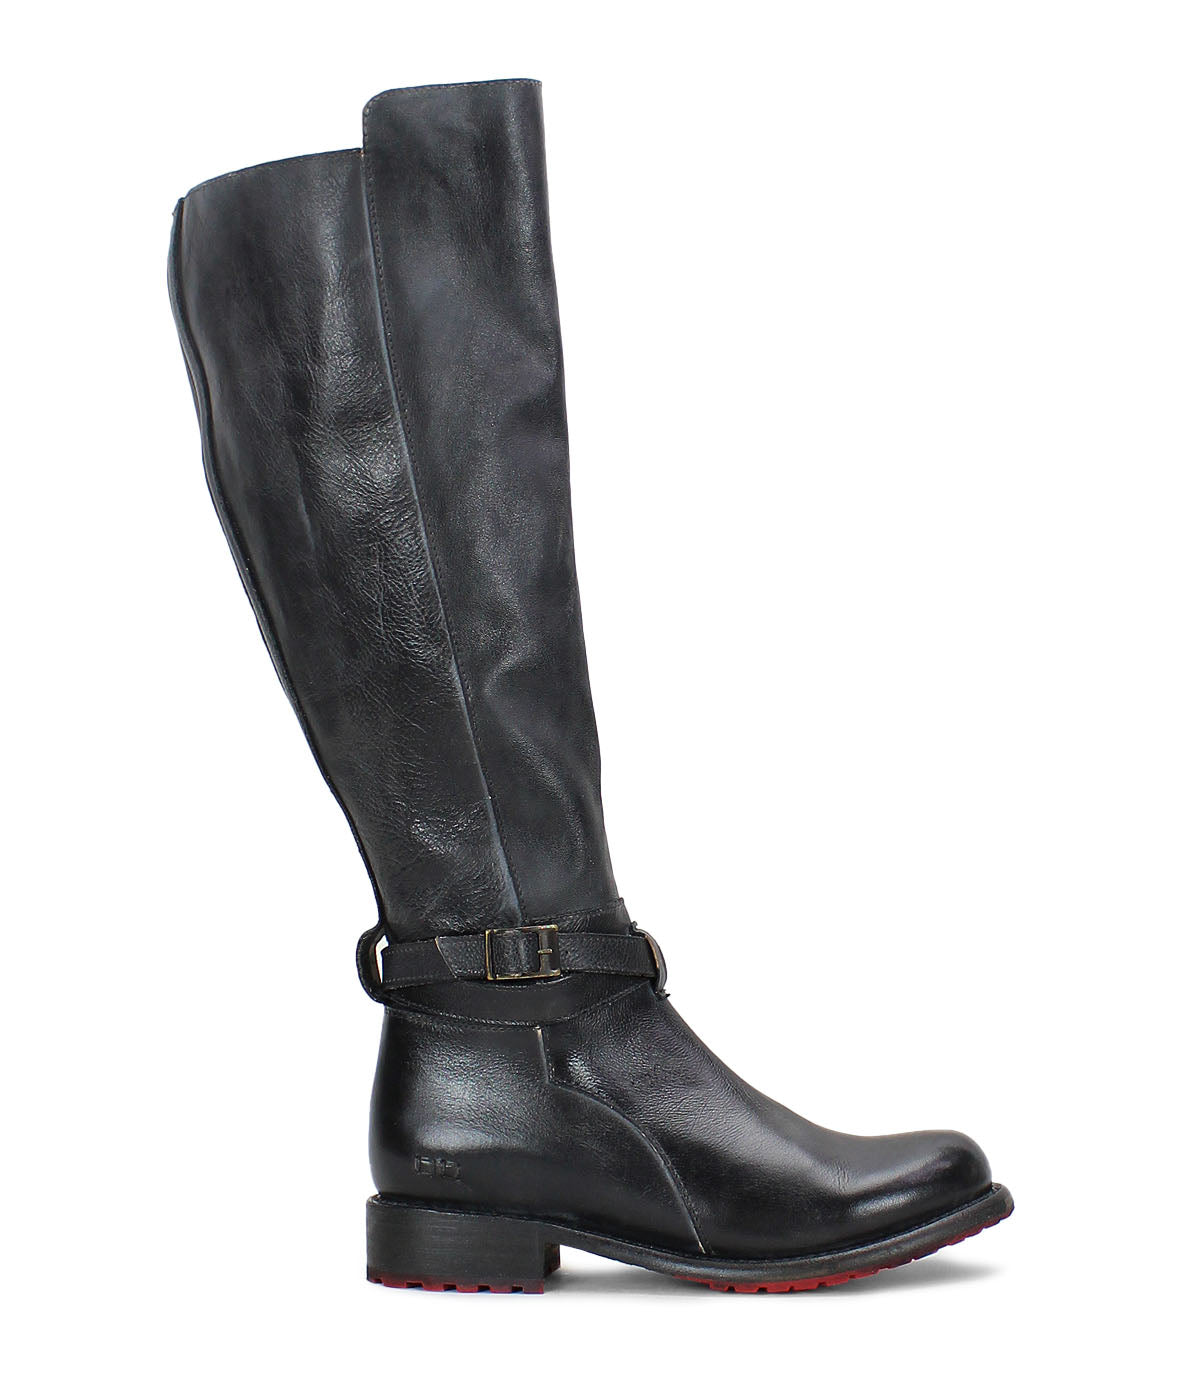 A women's black leather Bristol Wide Calf boot with a red sole by Bed Stu.